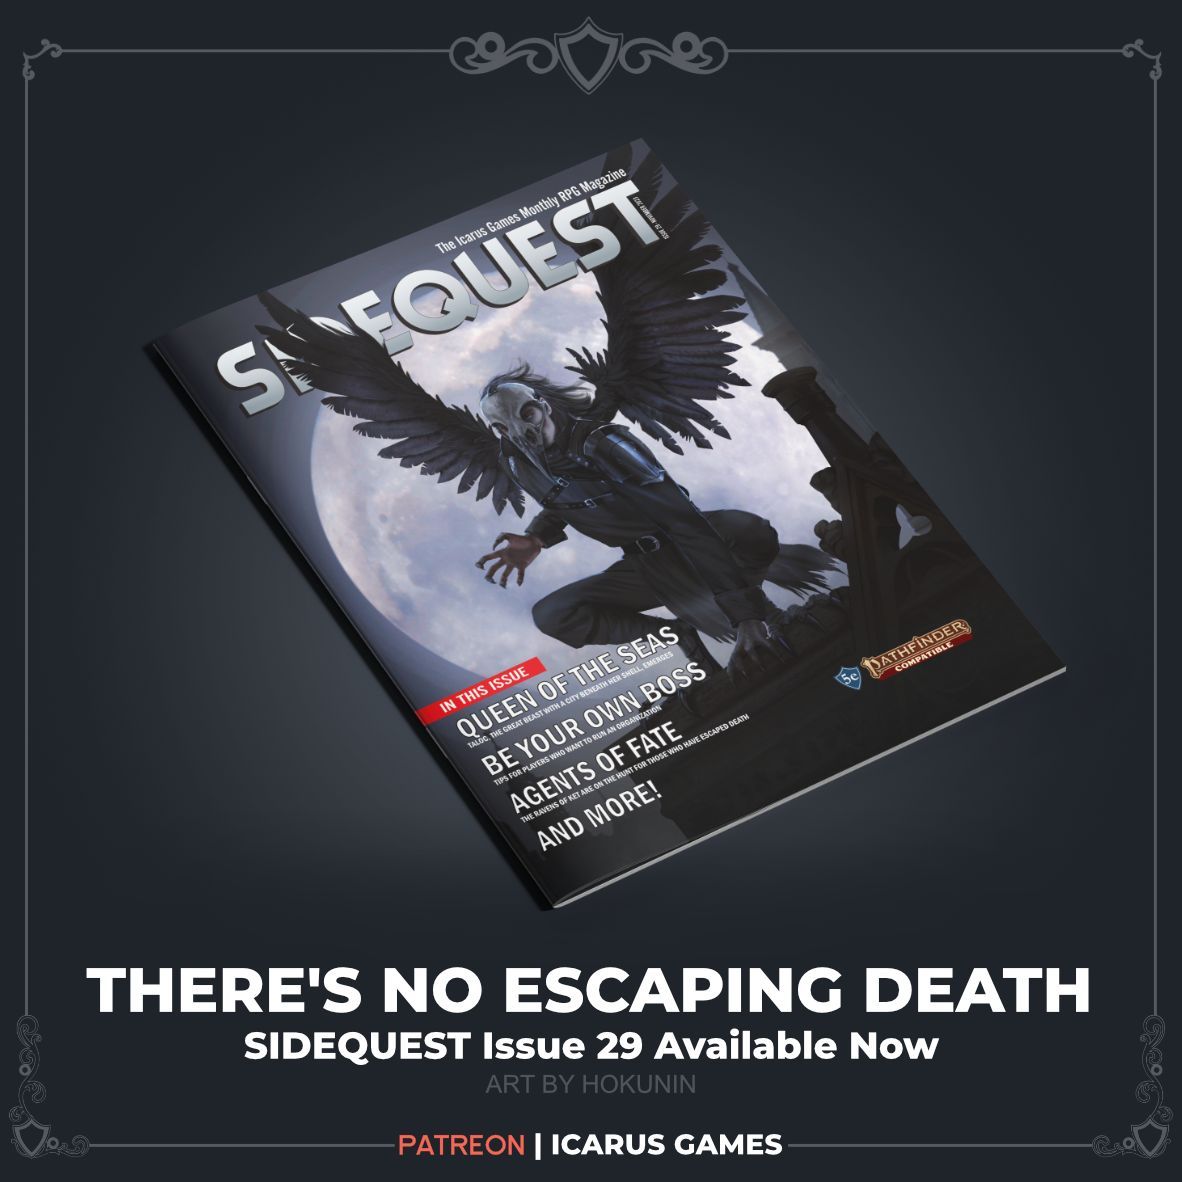 Icarus Games - SIDEQUEST magazine is a love letter to the